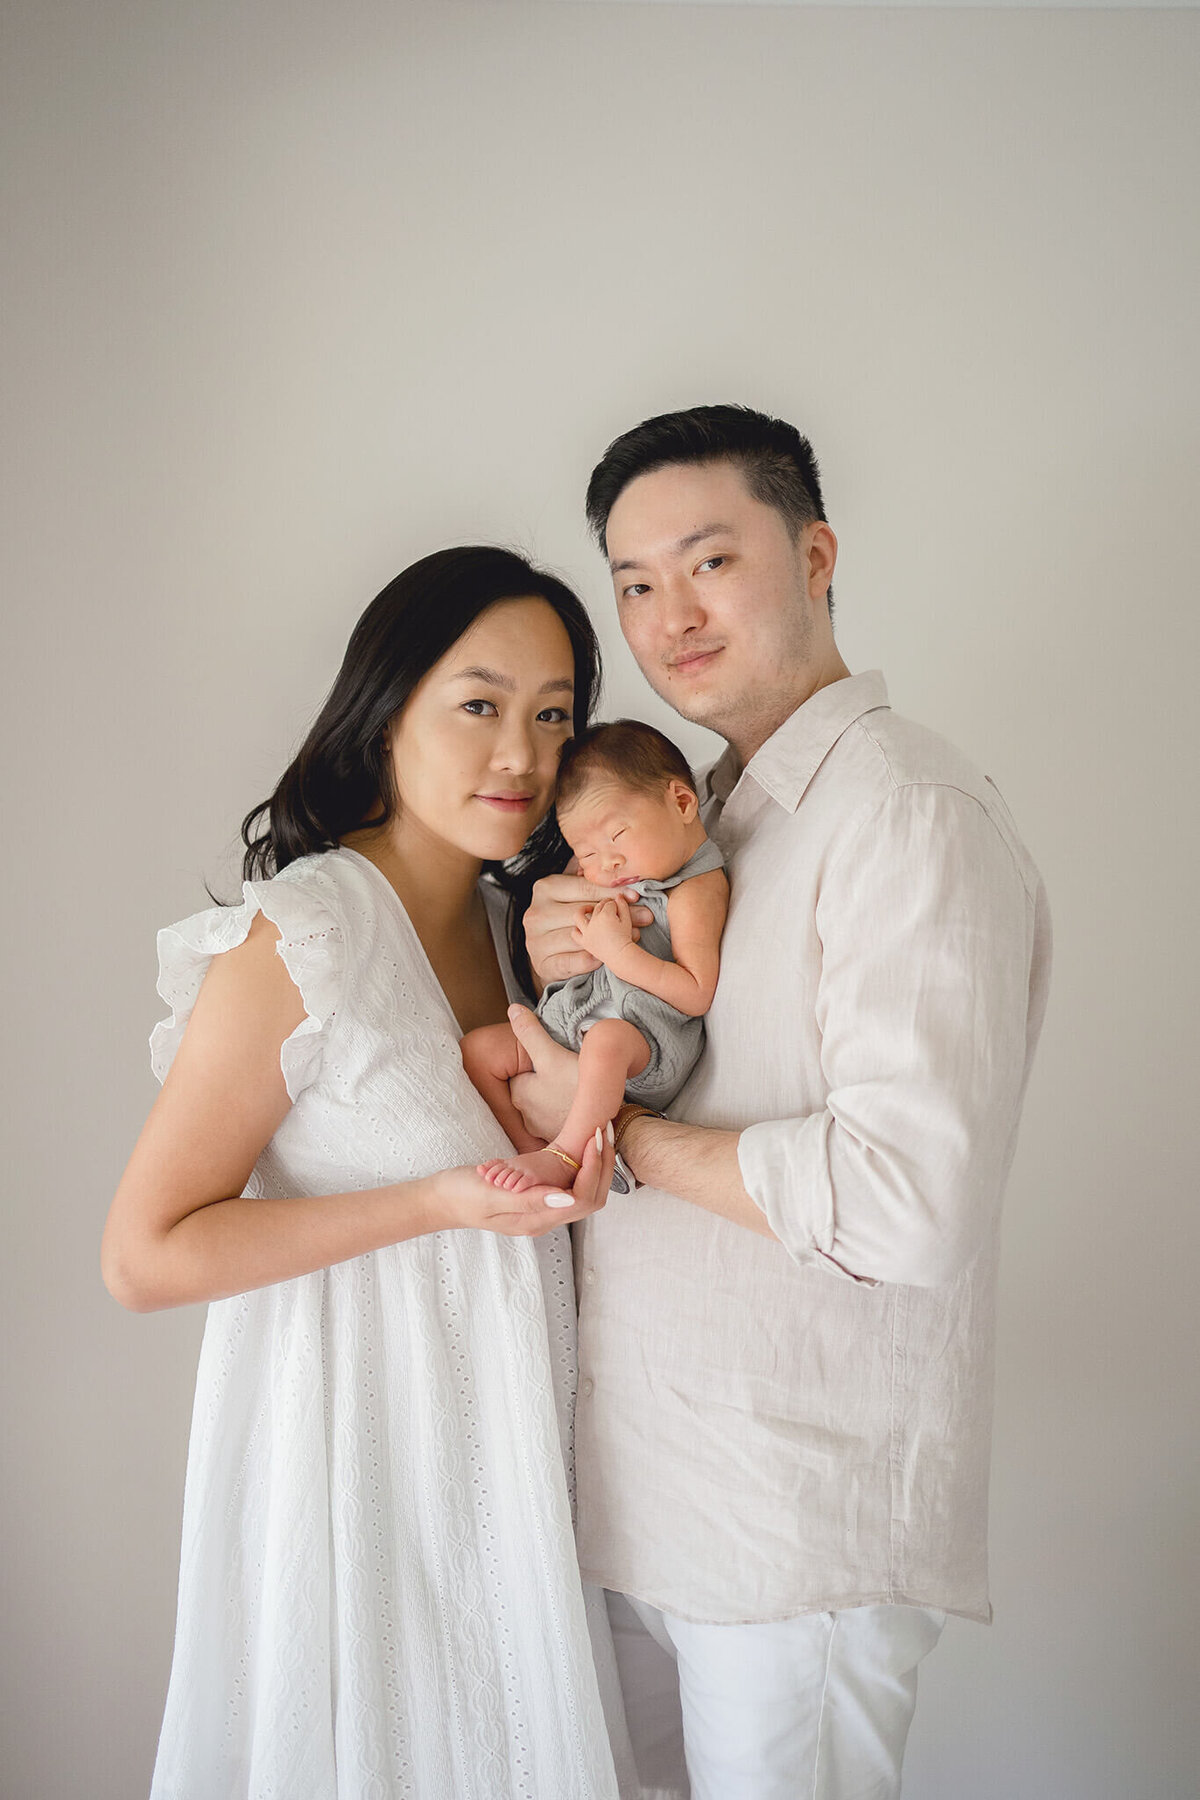 Capture the love and joy of a Chinese couple welcoming their newborn in their cozy Gold Coast home through stunning maternity photos.